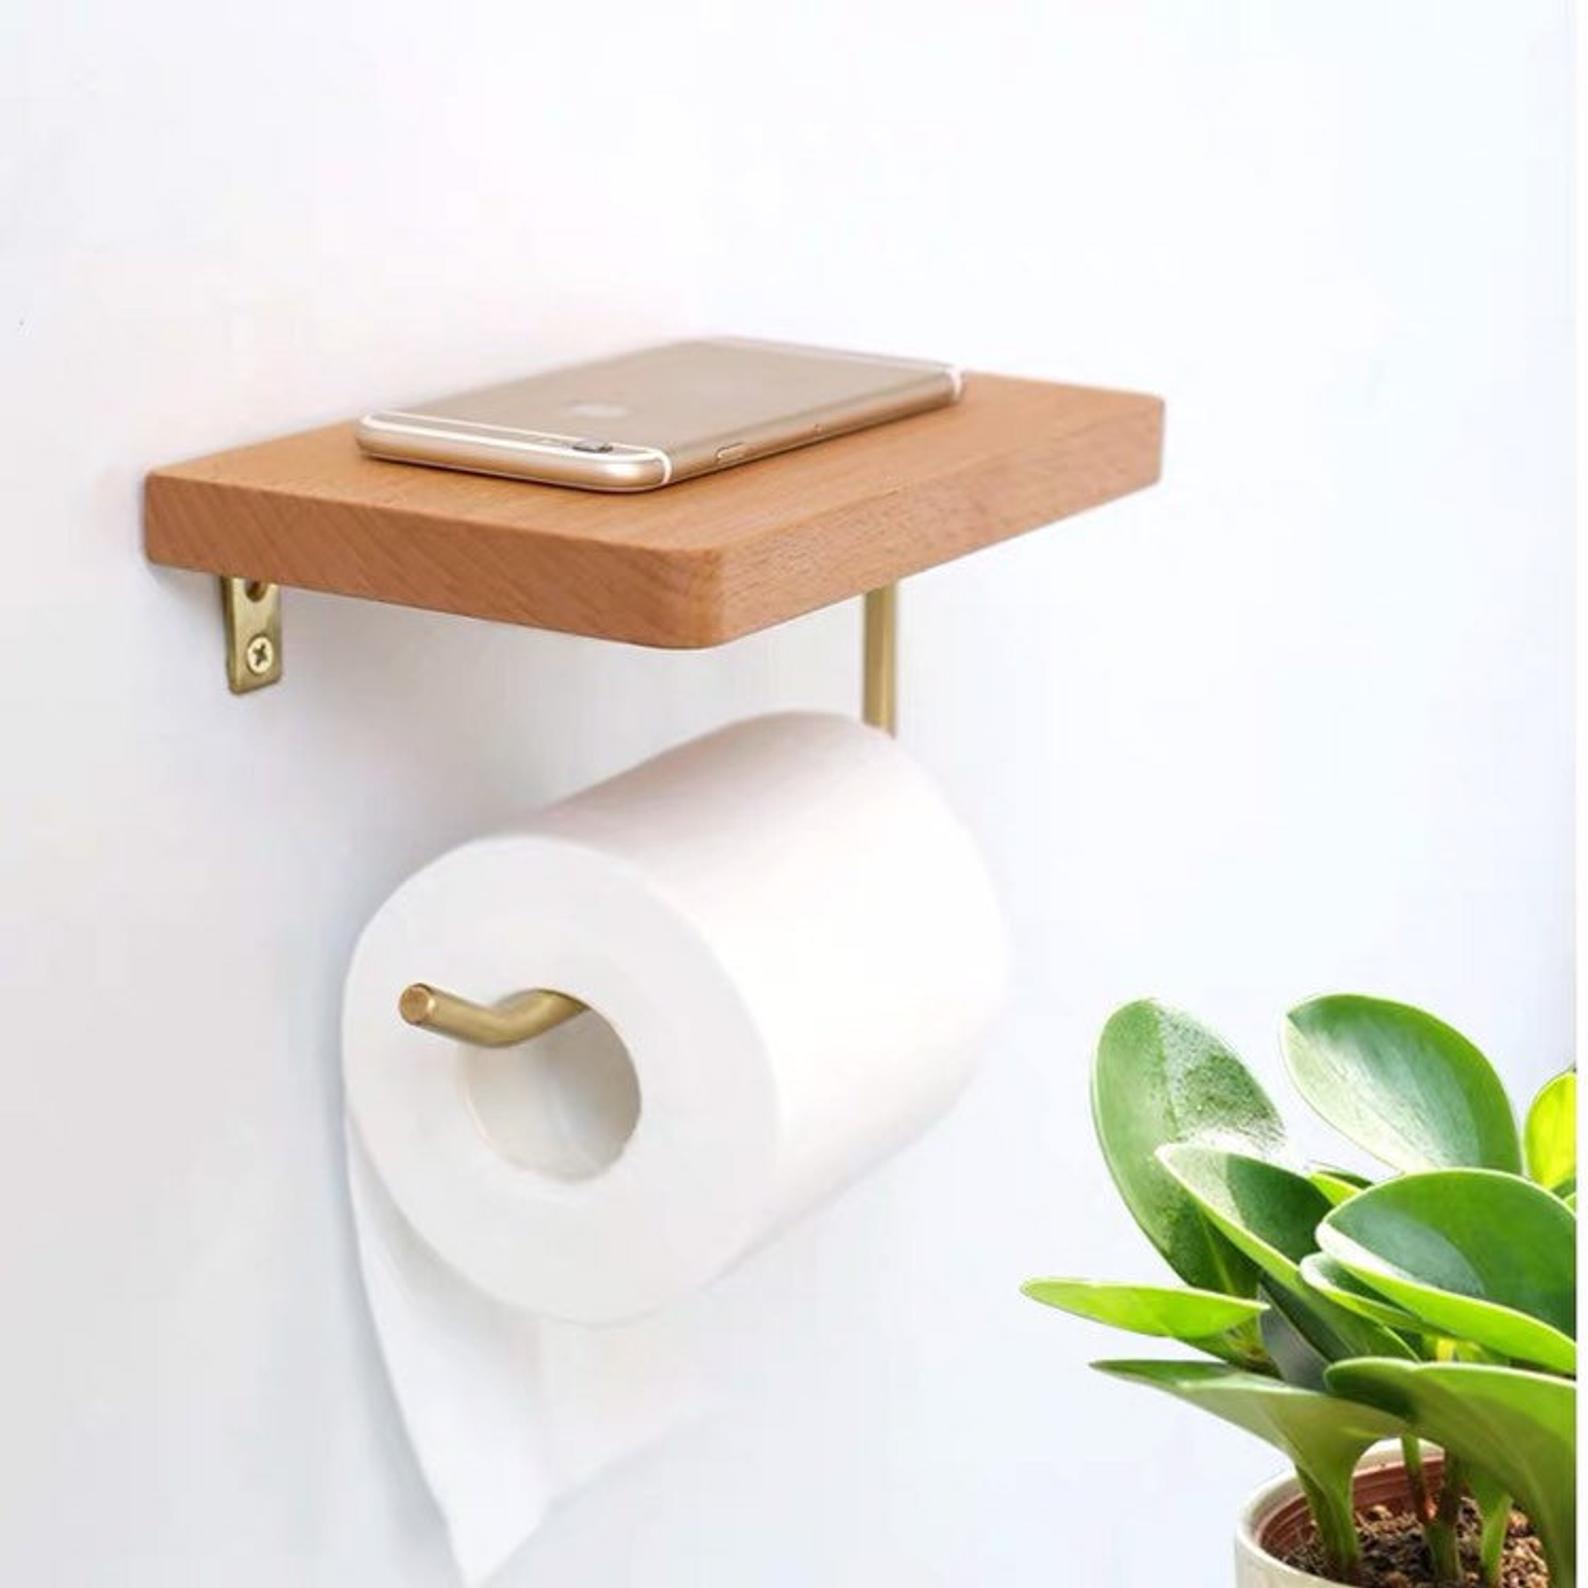 Wood and metal modern toilet paper holder